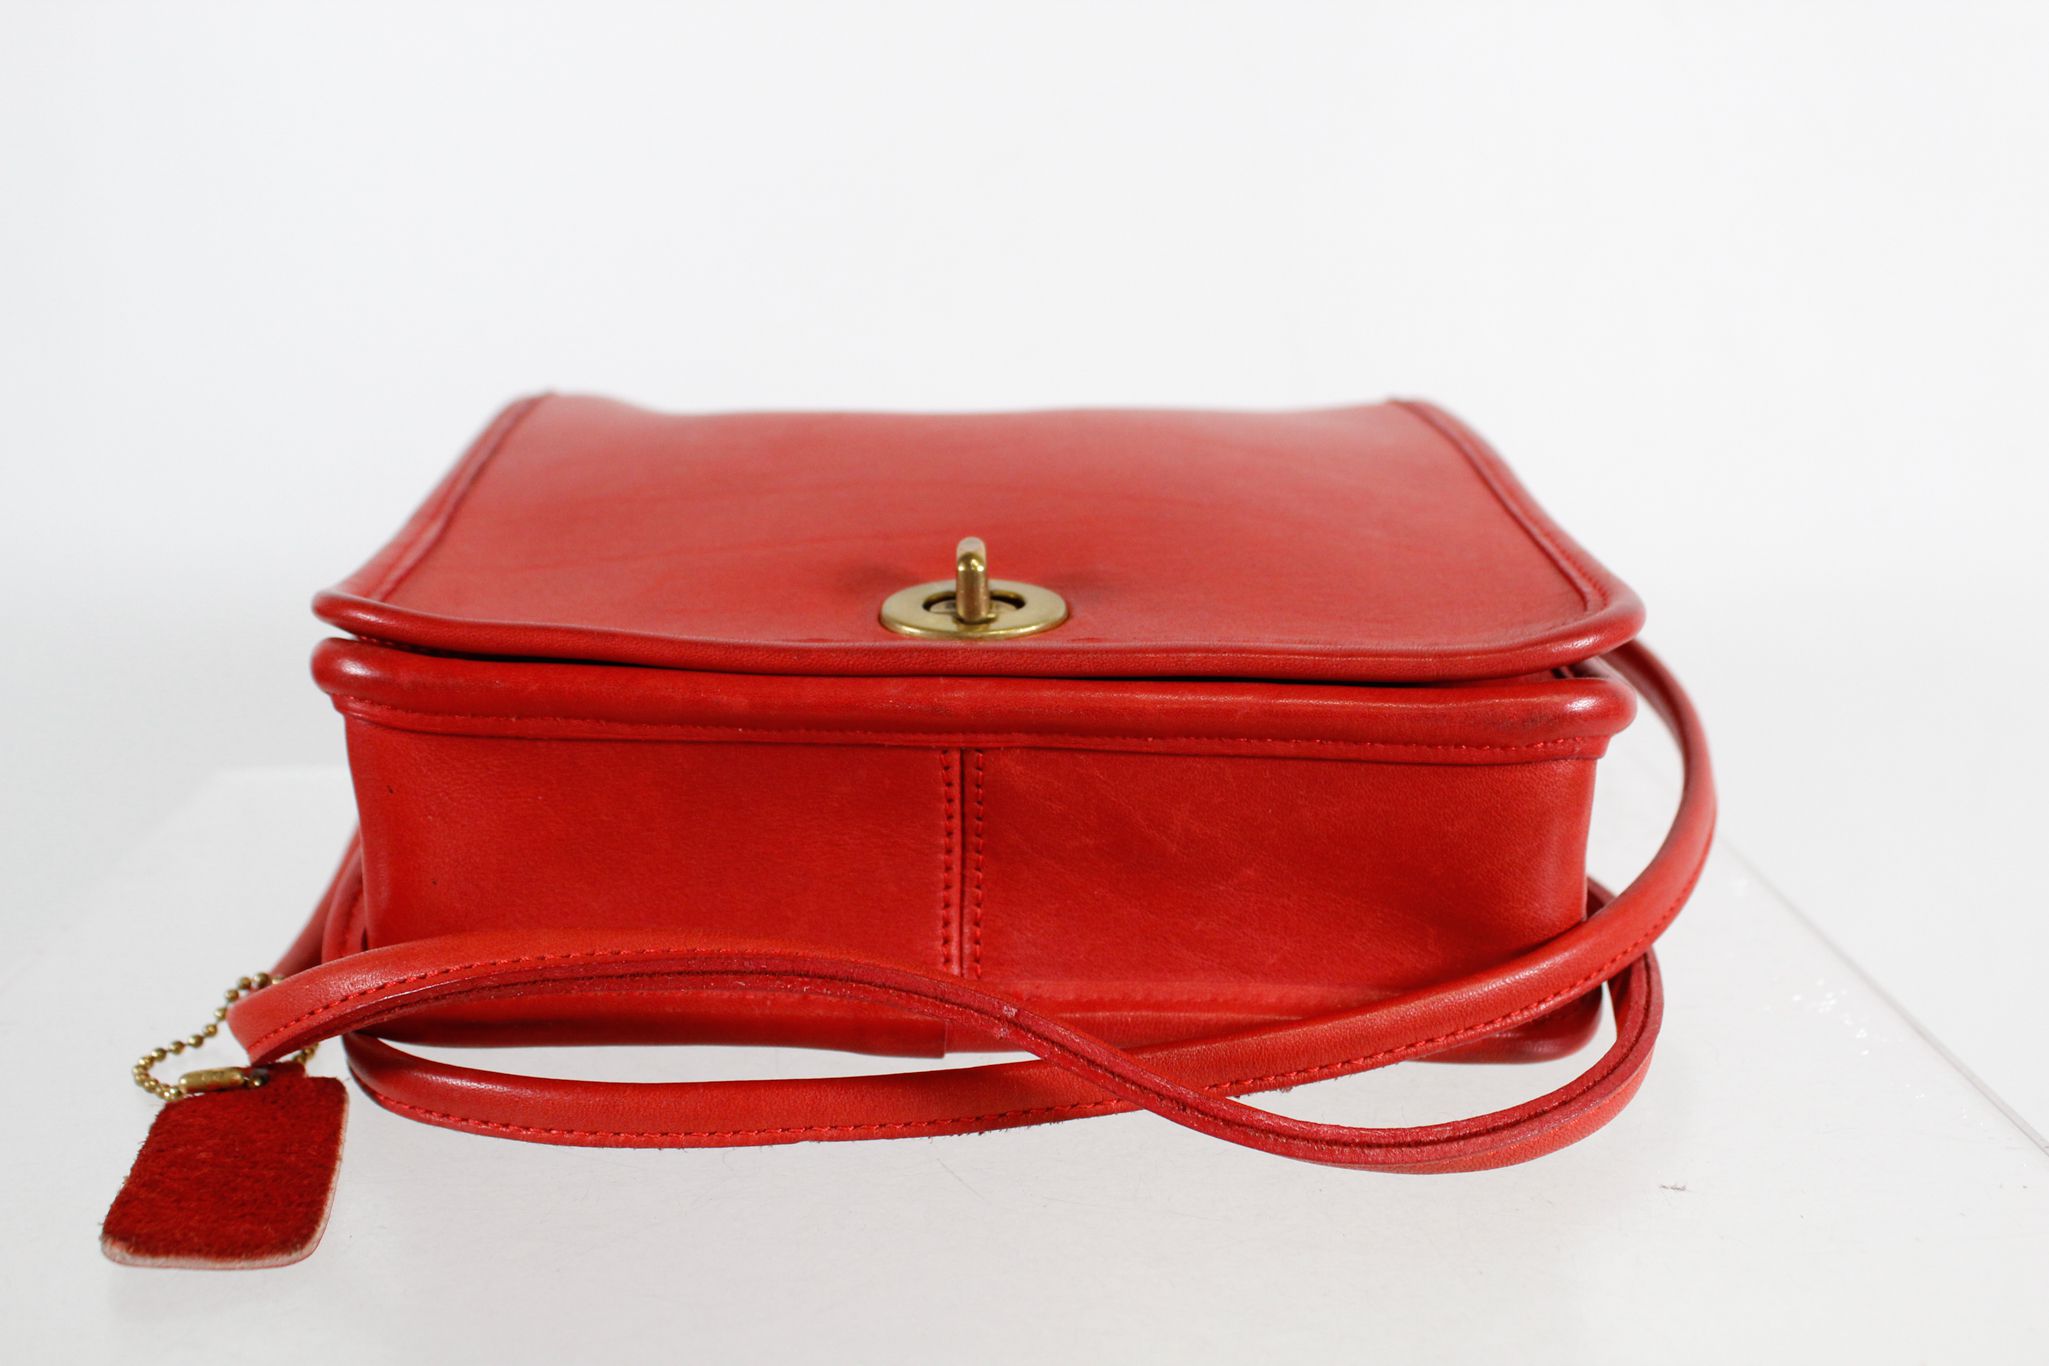 Vintage Coach 8809 Red Leather Turnlock Small Flap Cross-Body Purse | eBay